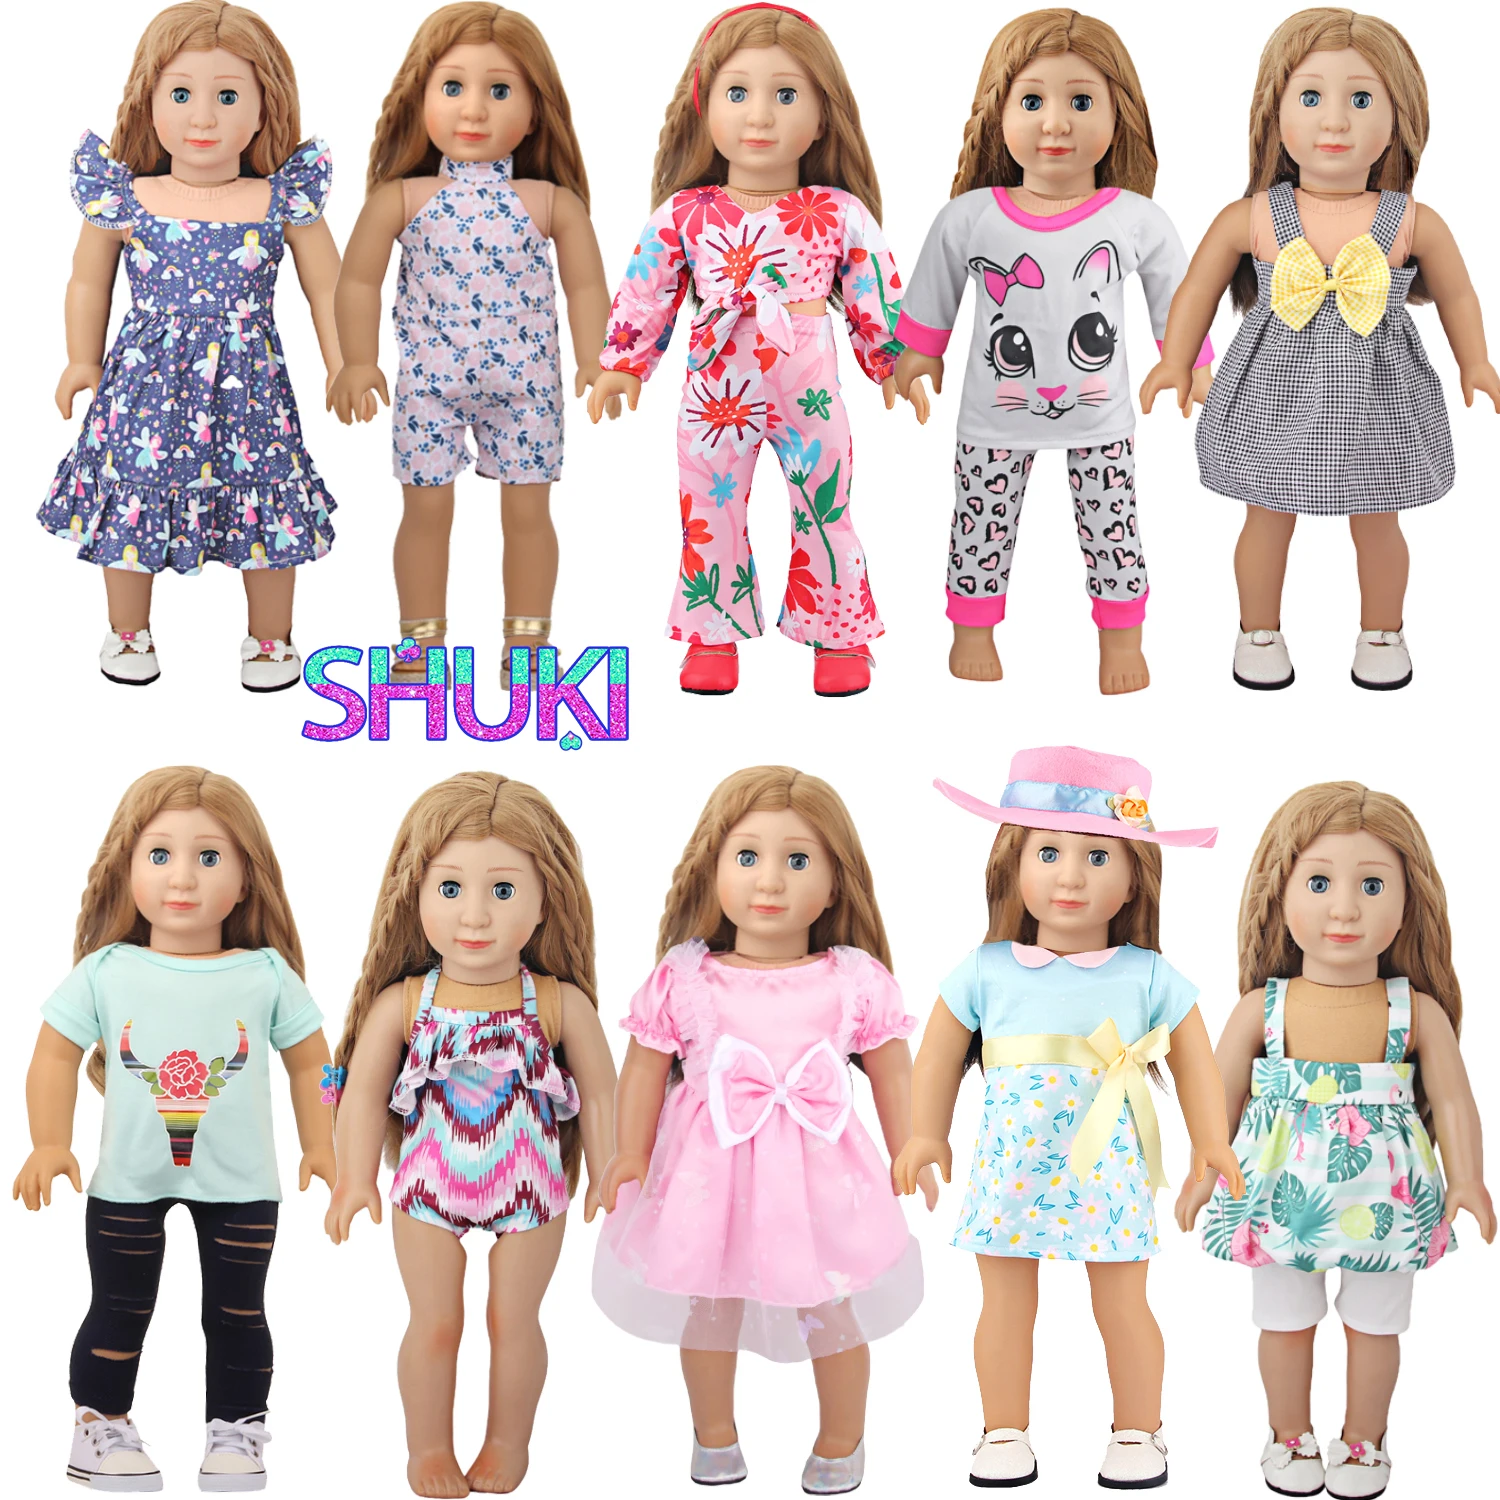 

Cartoon Series Doll Clothes Dress Flower Bud Skirt Shirt+Pants For 43cm Baby New Born&18 inch American,OG,Rissia Girl Doll Toy